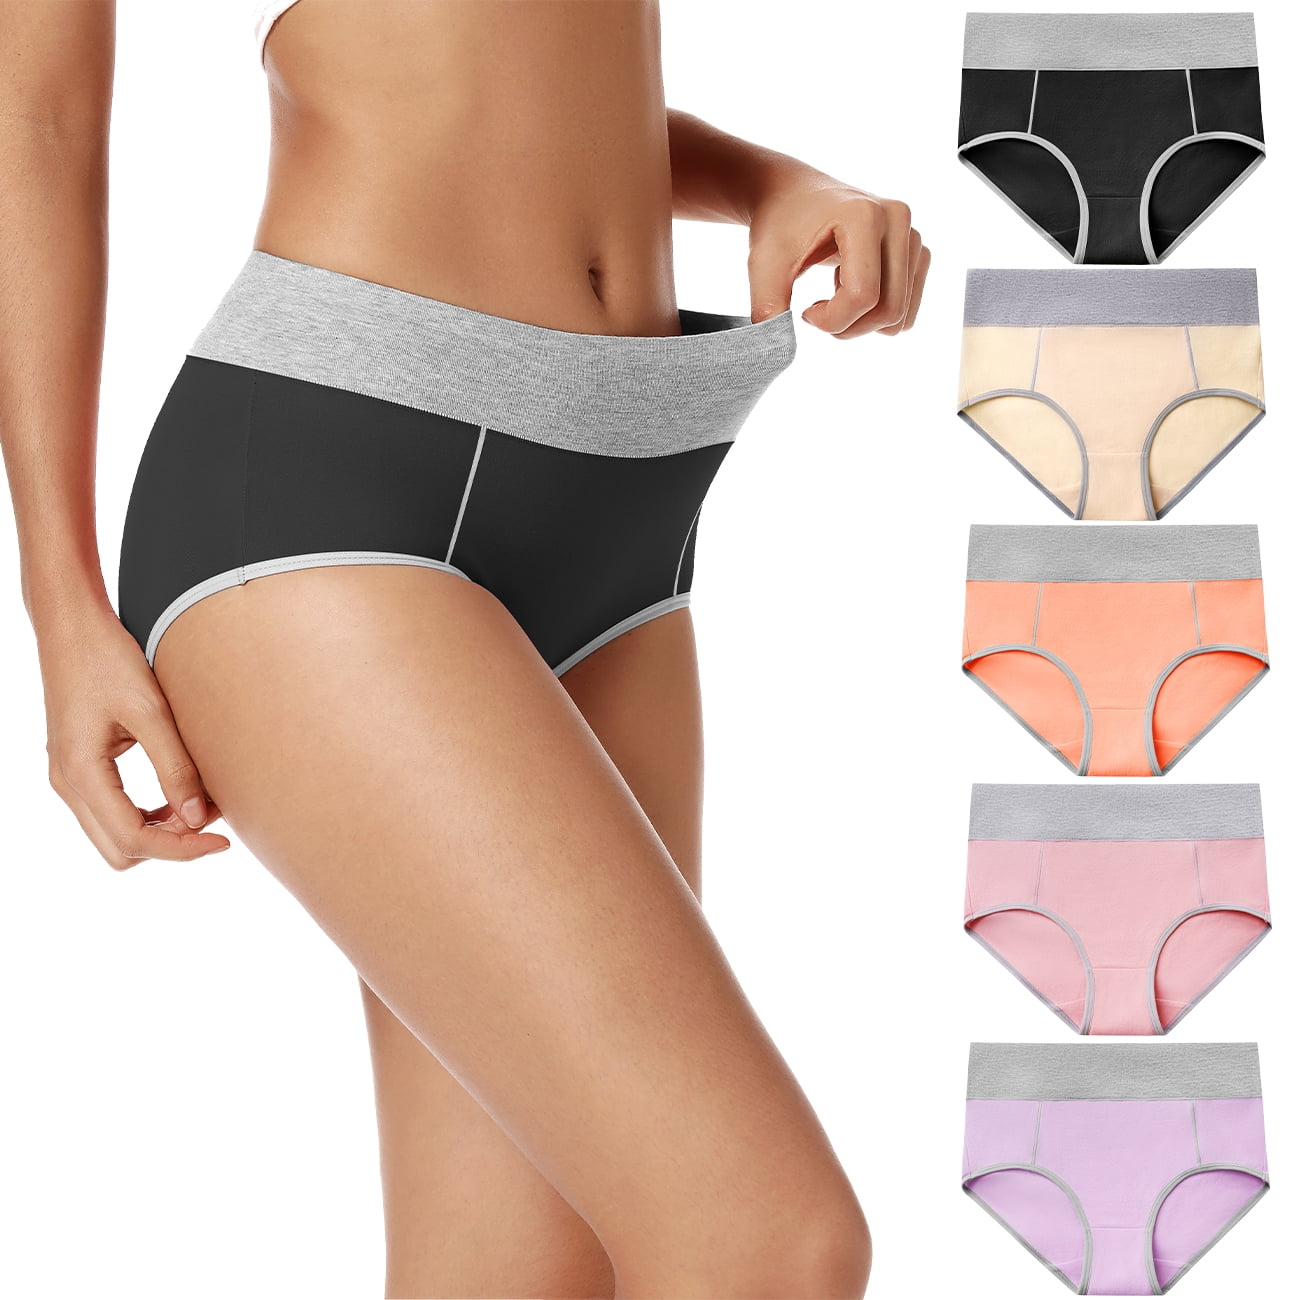  Womens High Waisted Cotton Underwear Soft Full Brief Panties  Ladies No Ride Up Underpants 5 Pack Size 8 X-Large